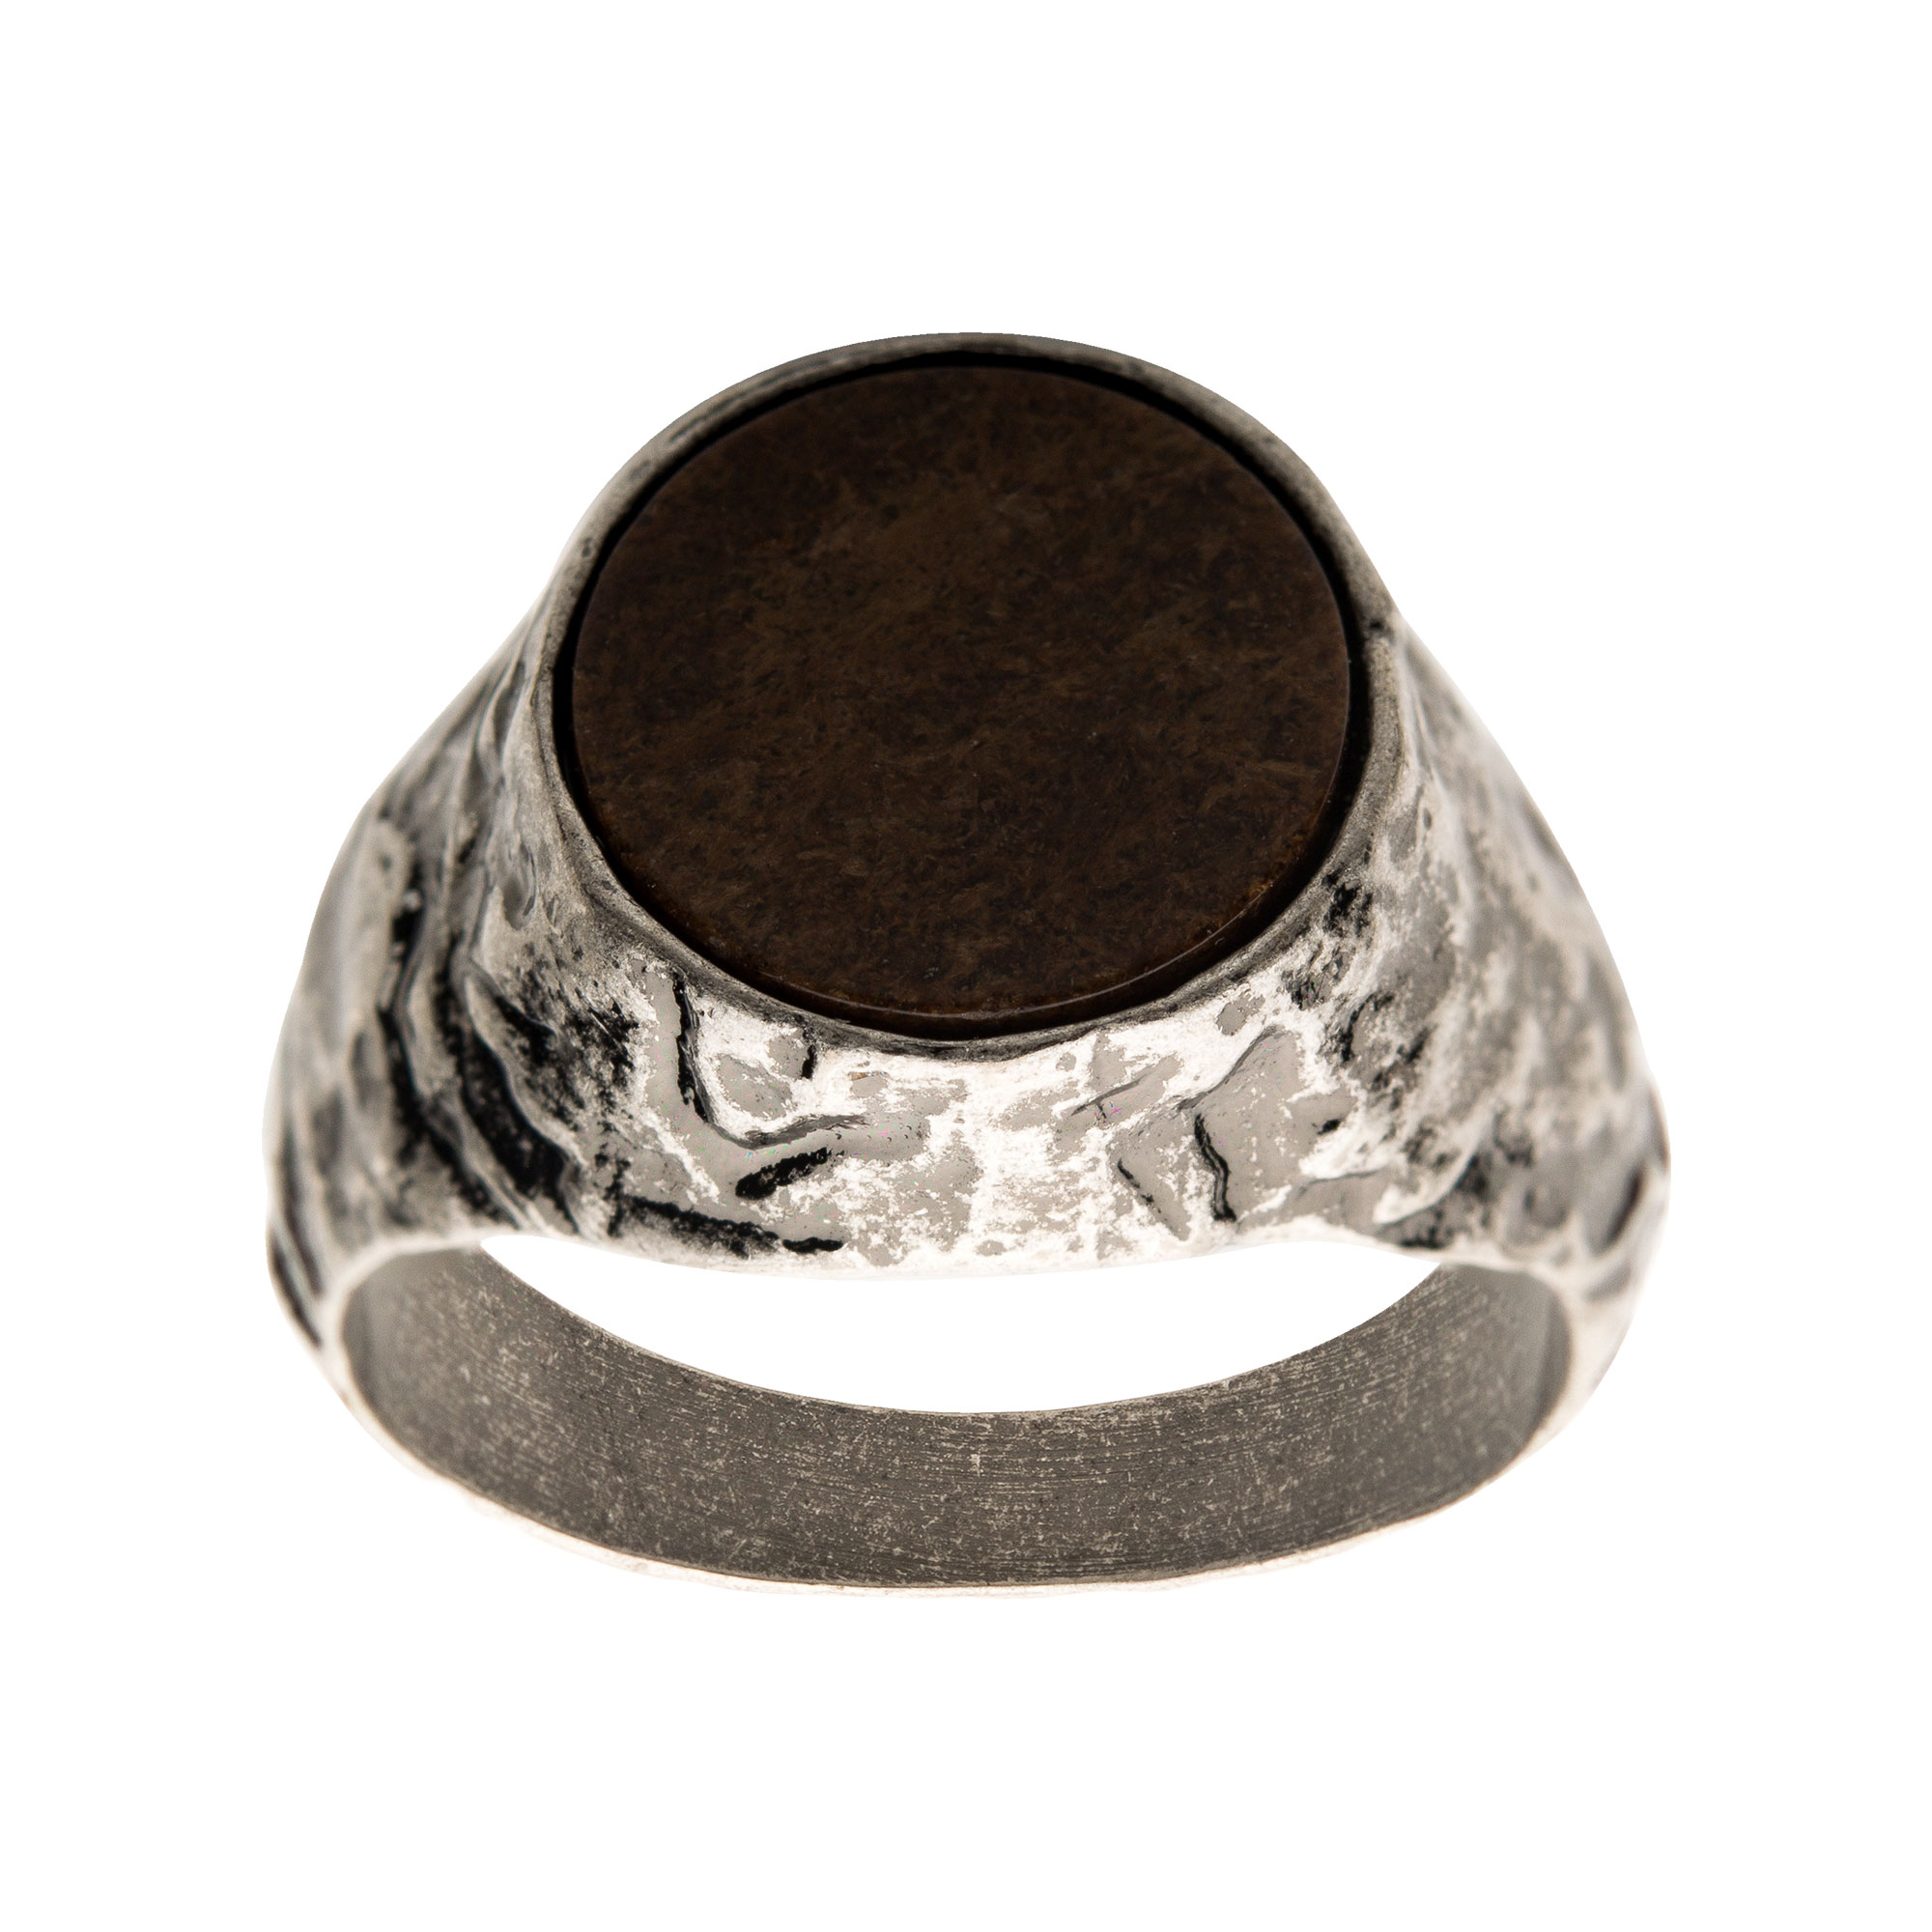 Stainless Steel Silver Plated with Bronze Stone Ring Image 2 Midtown Diamonds Reno, NV